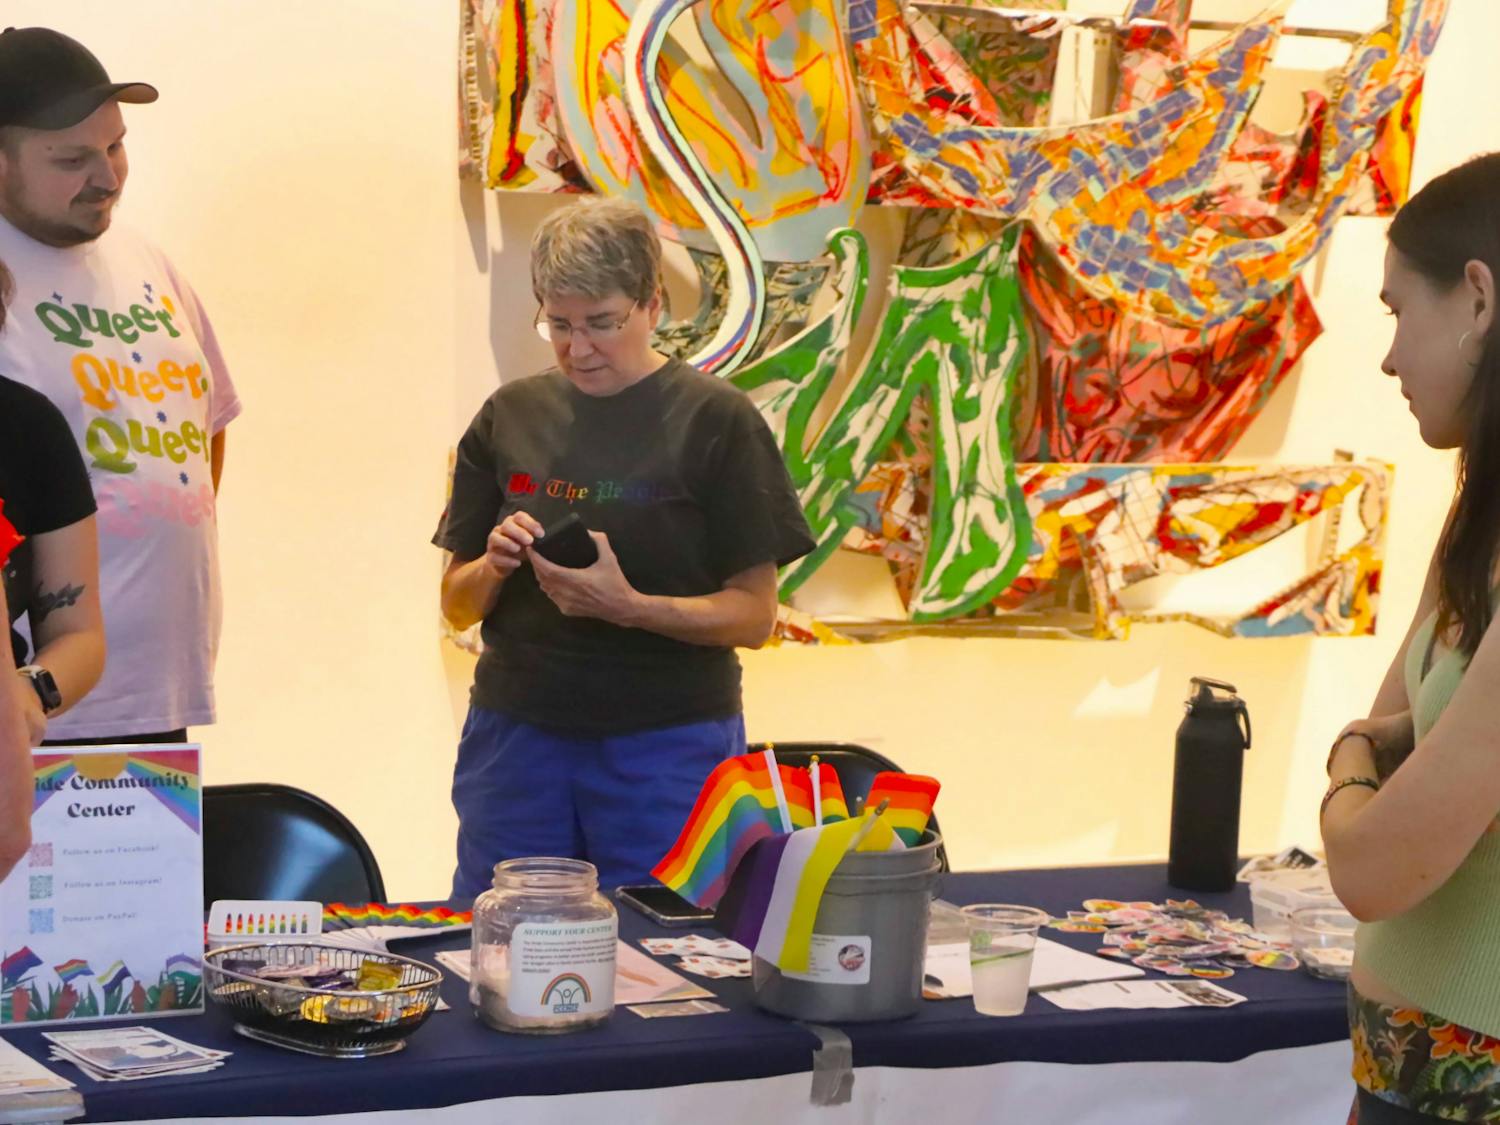 The Pride Community Center of North Central Florida tabled at the Museum Night offering Pride flags among other items on Thursday, June 8, 2023.